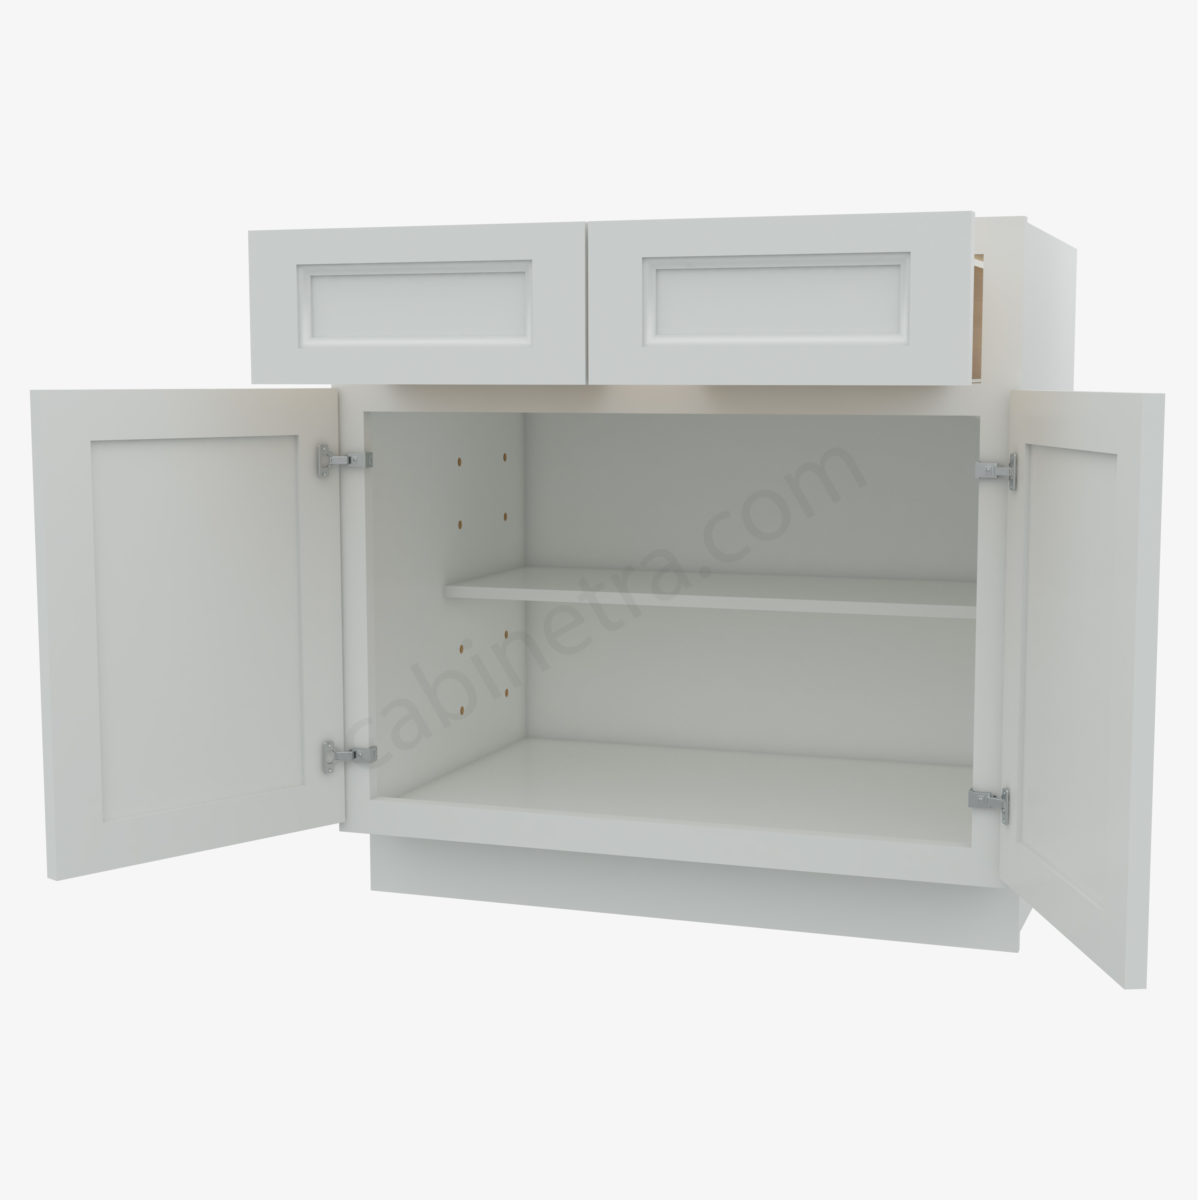 TW B33B 5 Forevermark Uptown White Cabinetra scaled